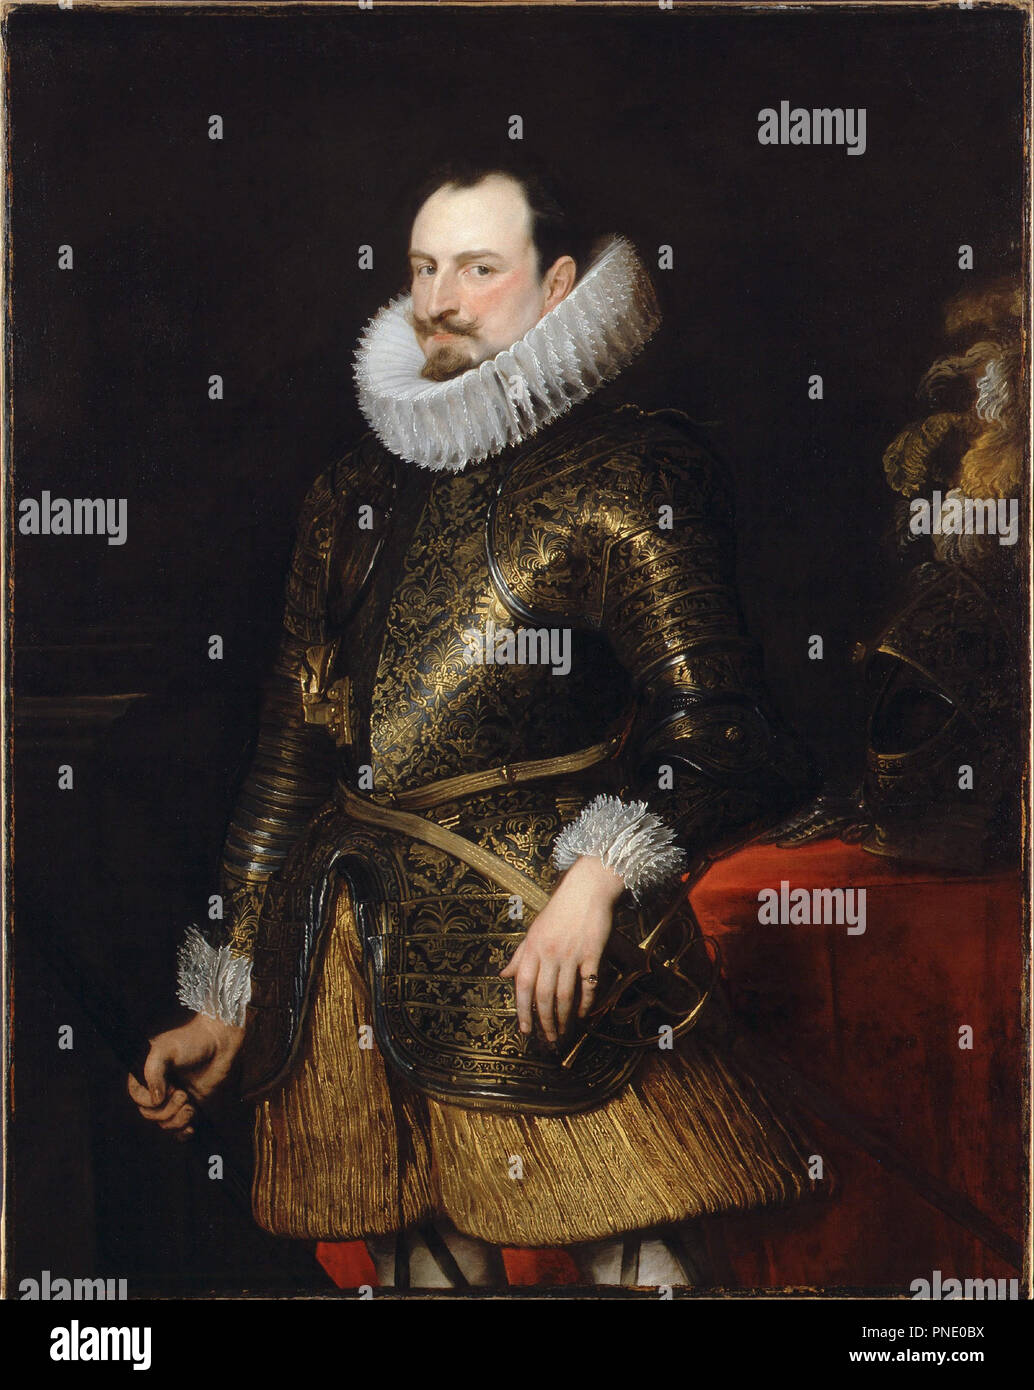 Emmanuel Philibert of Savoy, Prince of Oneglia. Date/Period: 1624. Painting. Oil on canvas Oil. Height: 1,260 mm (49.60 in); Width: 995 mm (39.17 in). Author: van Dyck, Sir Anthony. ANTHONIS VAN DYCK. Stock Photo